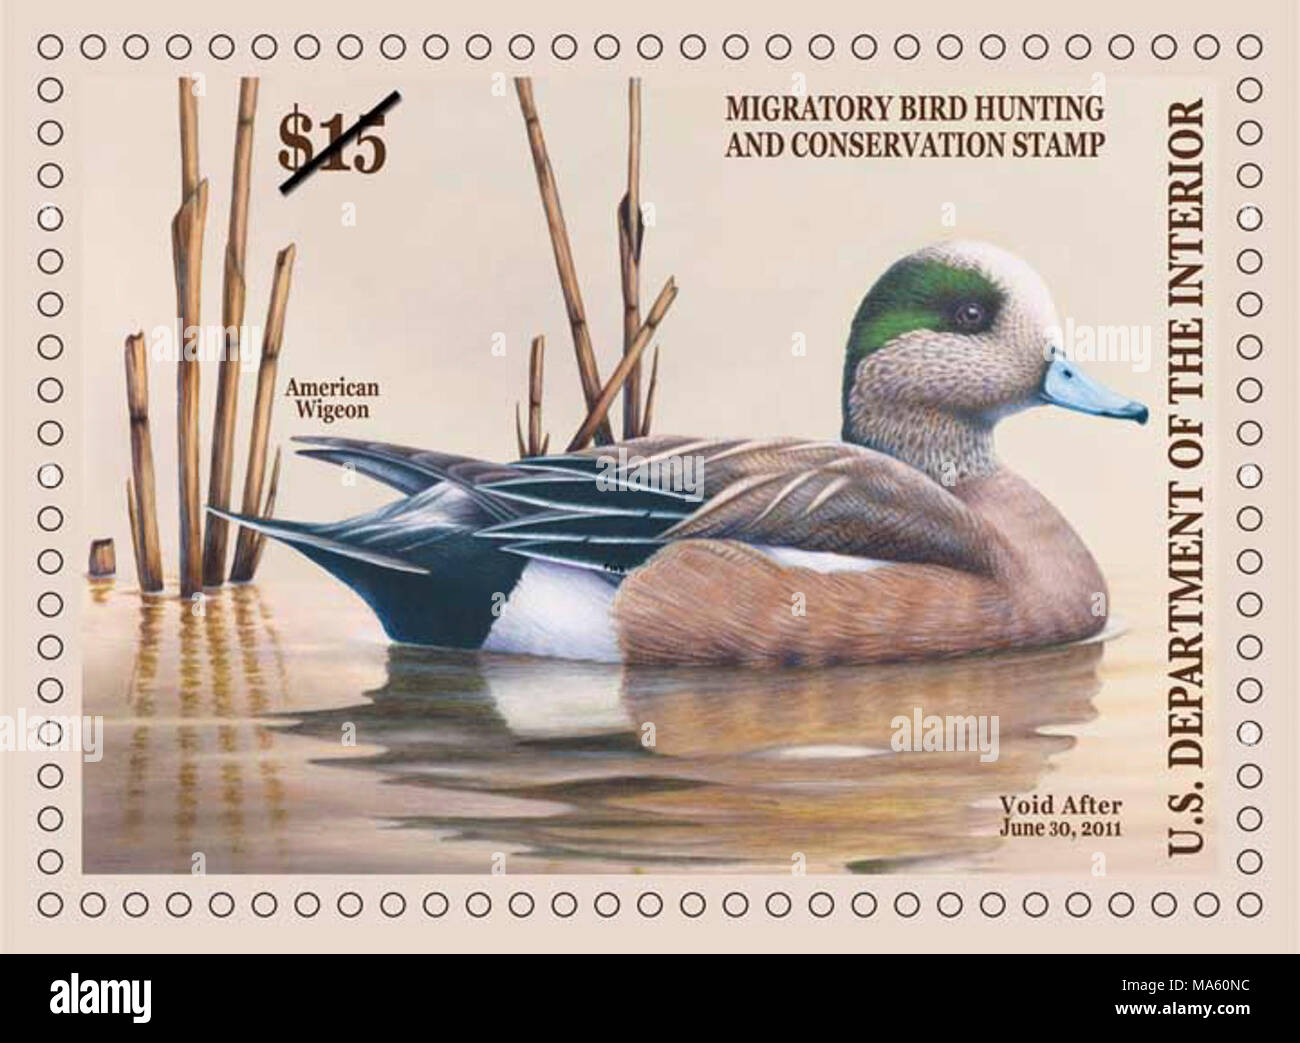 2010-11 Federal Duck Stamp. The 2010-2011 Federal Duck Stamp by Robert Bealle of Waldorf, Maryland. - - - - - - -  The Pacific Southwest Region and its conservation partners will host the 2010 Federal Duck Stamp Art Contest  October 15-16 at the David Brower Center in Berkeley, California. This is the first time in the prestigous contest's 61 year history that the event has been held in the West, and for only the second time west of the Mississippi River.   “Having this prestigious contest in the heart of the urban Bay Area provides a unique opportunity to introduce new, non-traditional audien Stock Photo